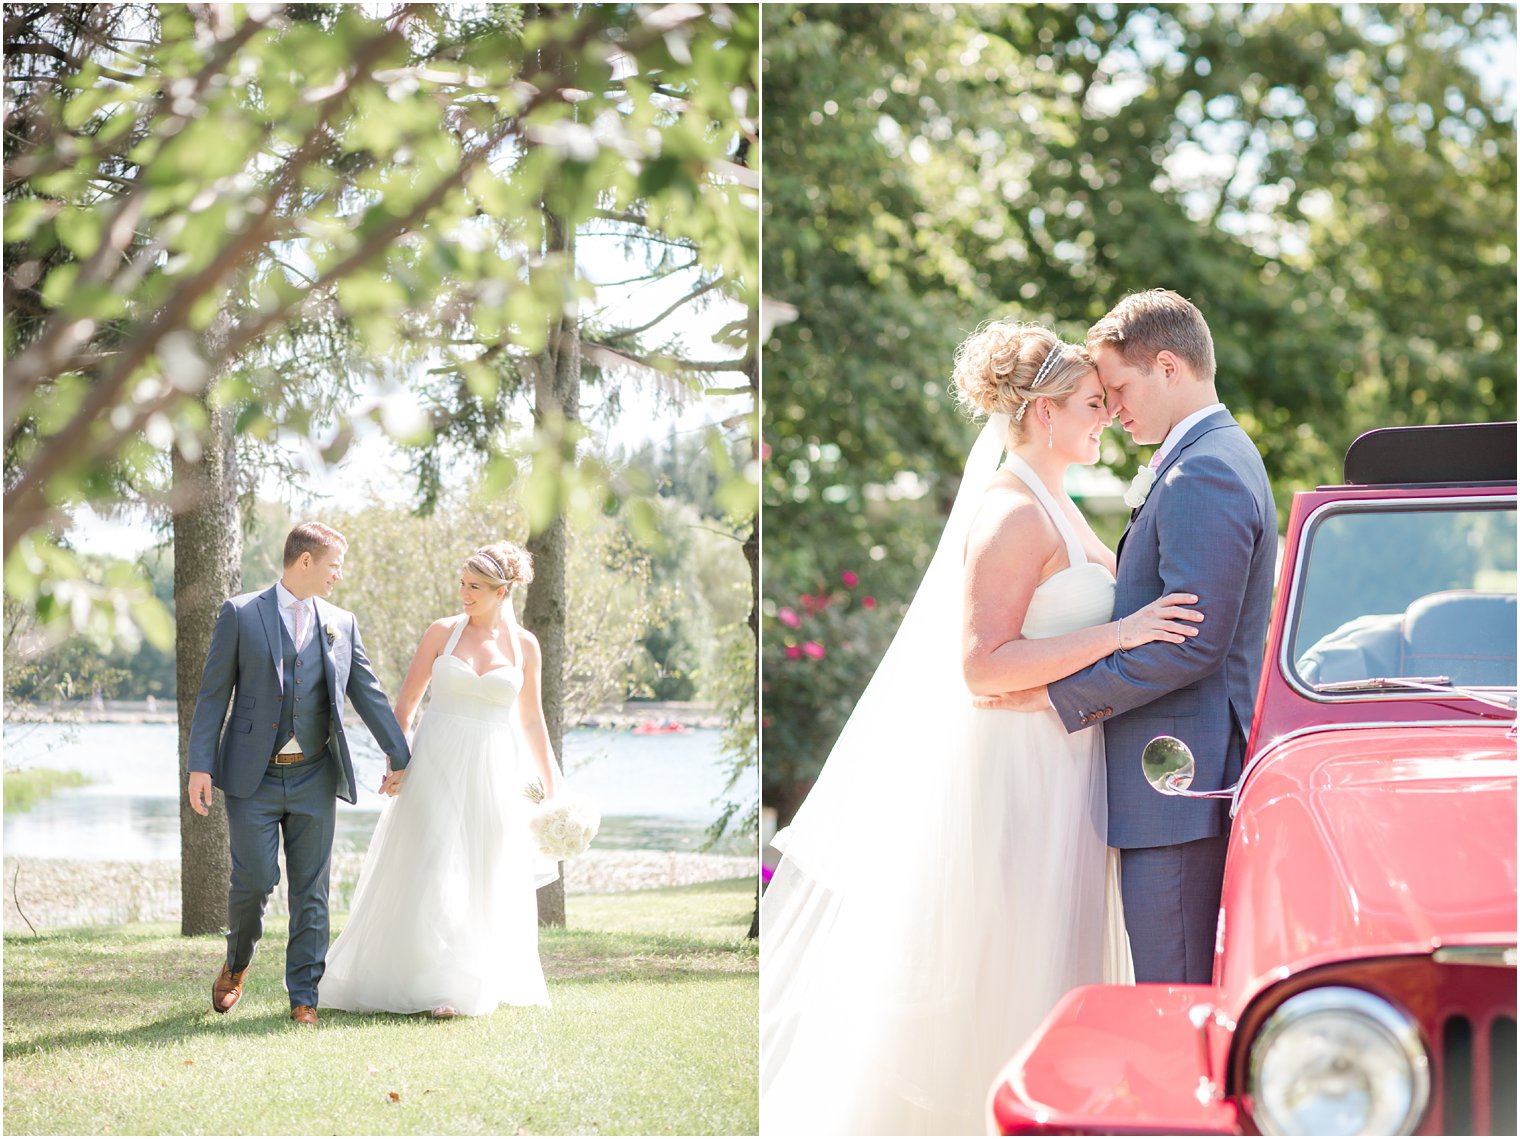 Bride and groom portraits with red Jeepster